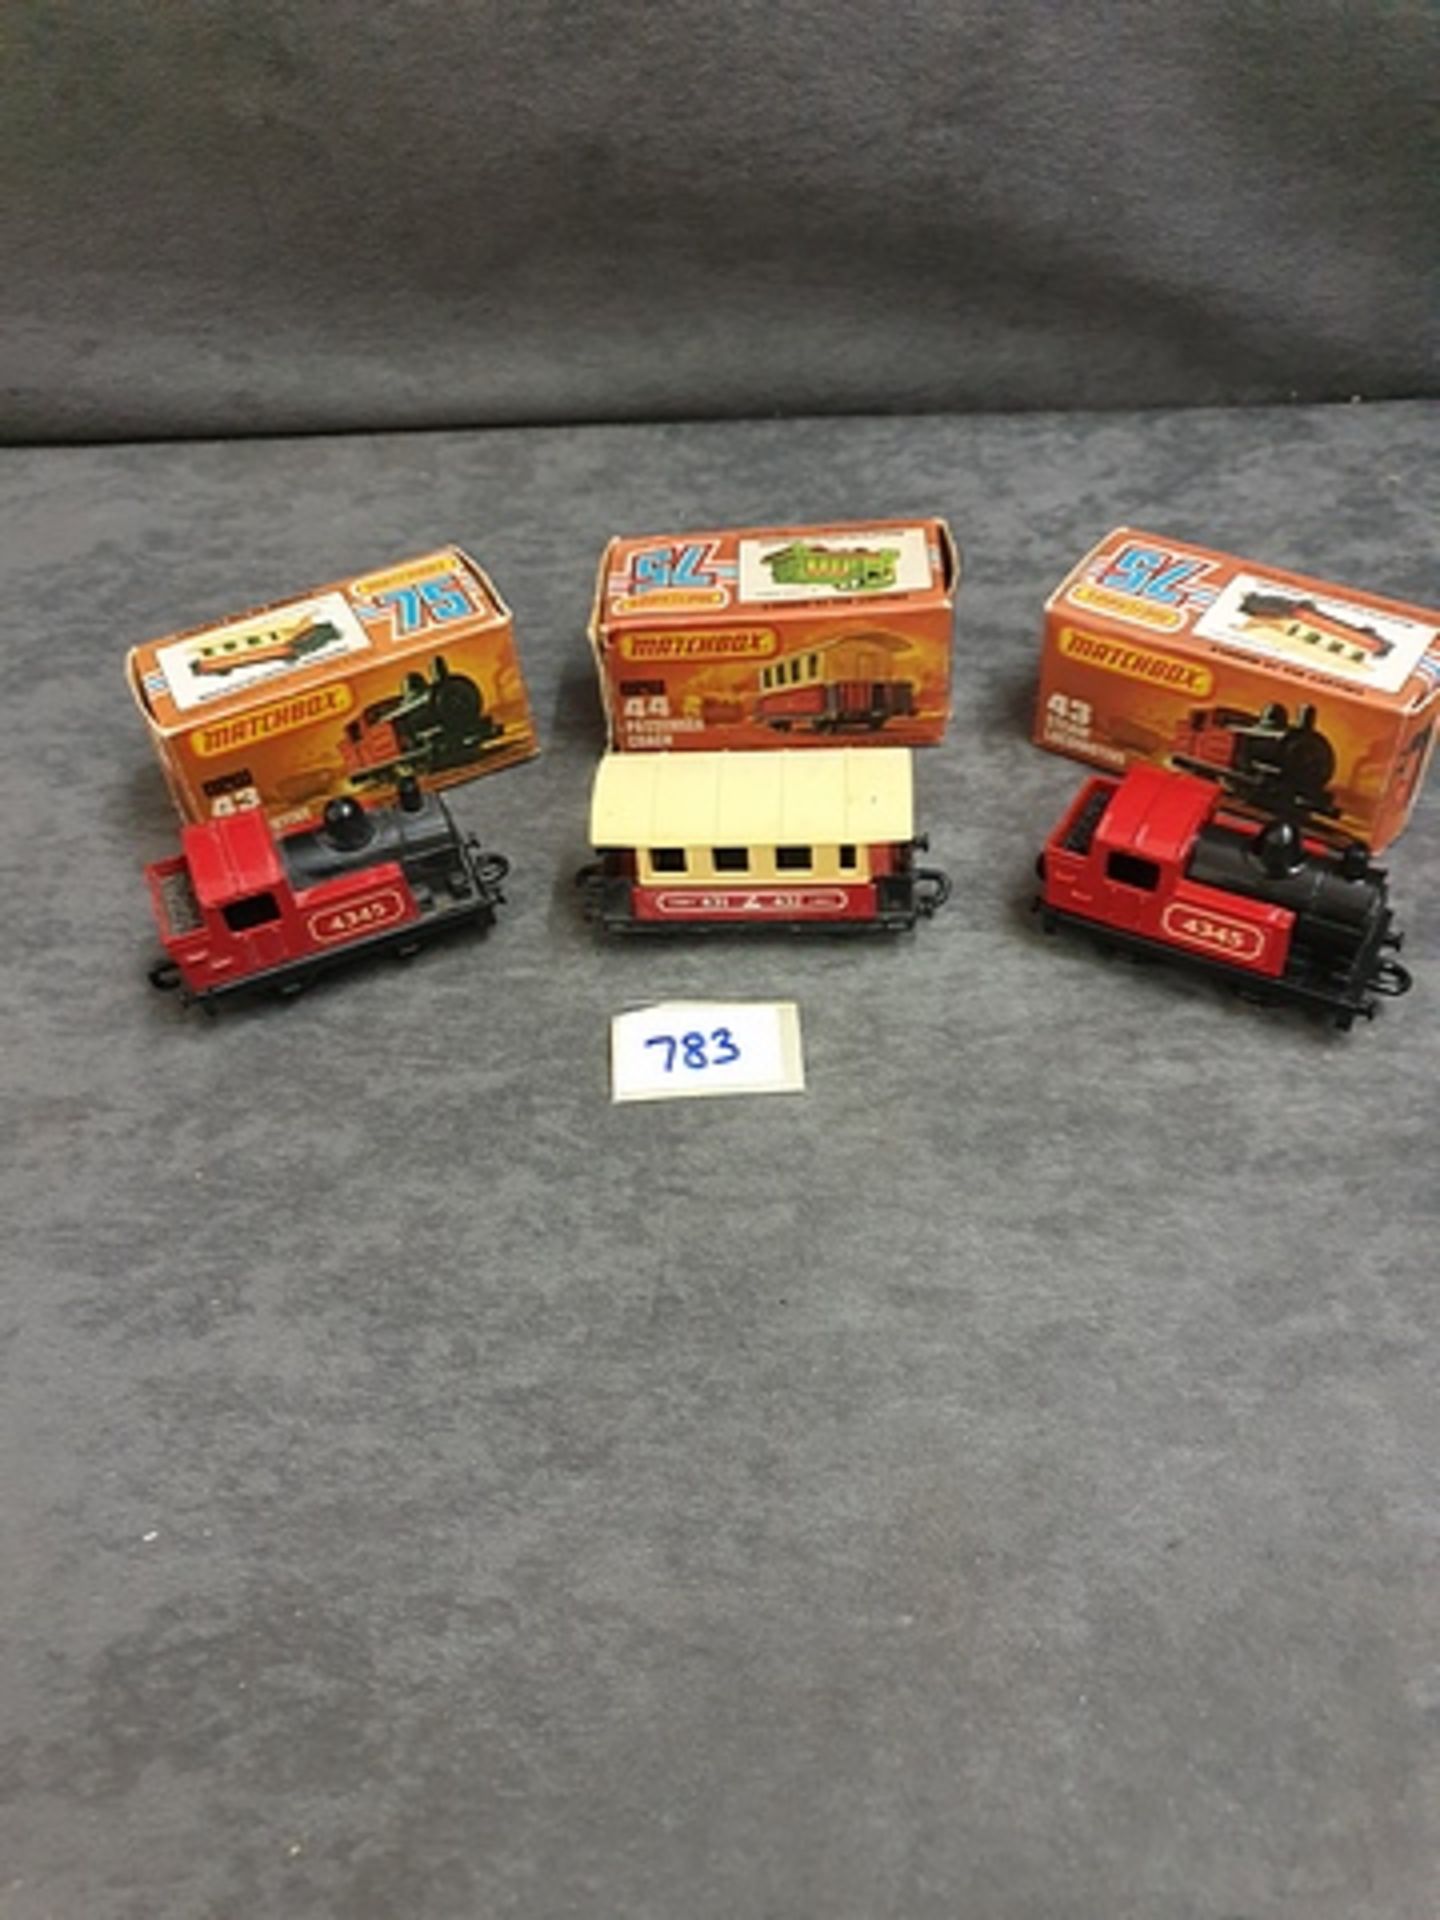 3x Matchbox Superfast Diecast All Boxed Comprising Of 2x #43 Steam Locomotive In Red 1x 44 Passenger